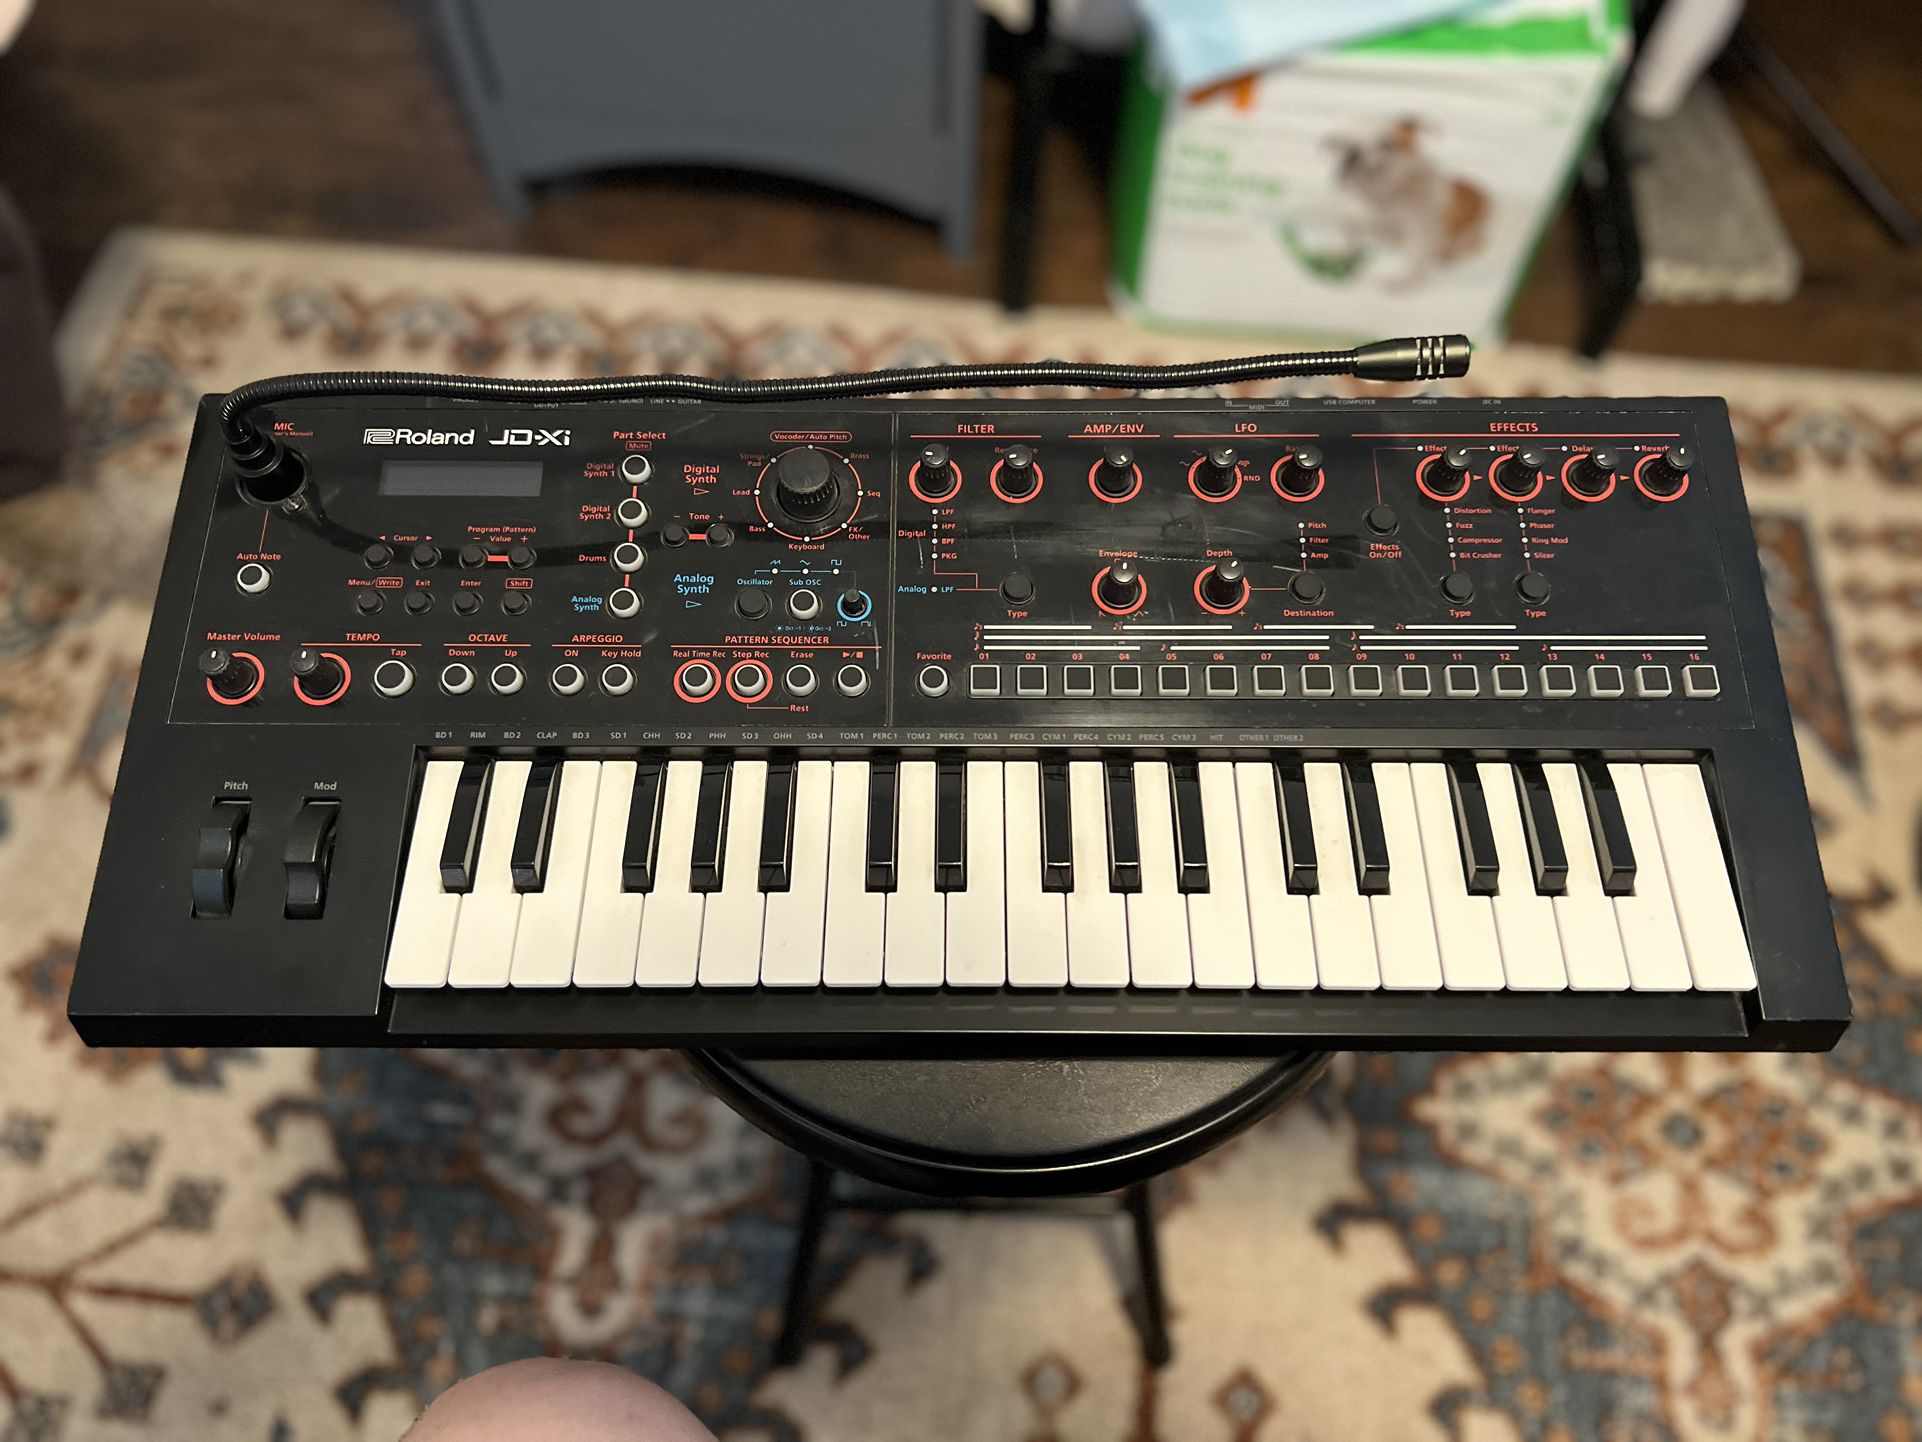 Roland JD-Xi Analog/Digital Synthesizer with Vocoder for Sale in El